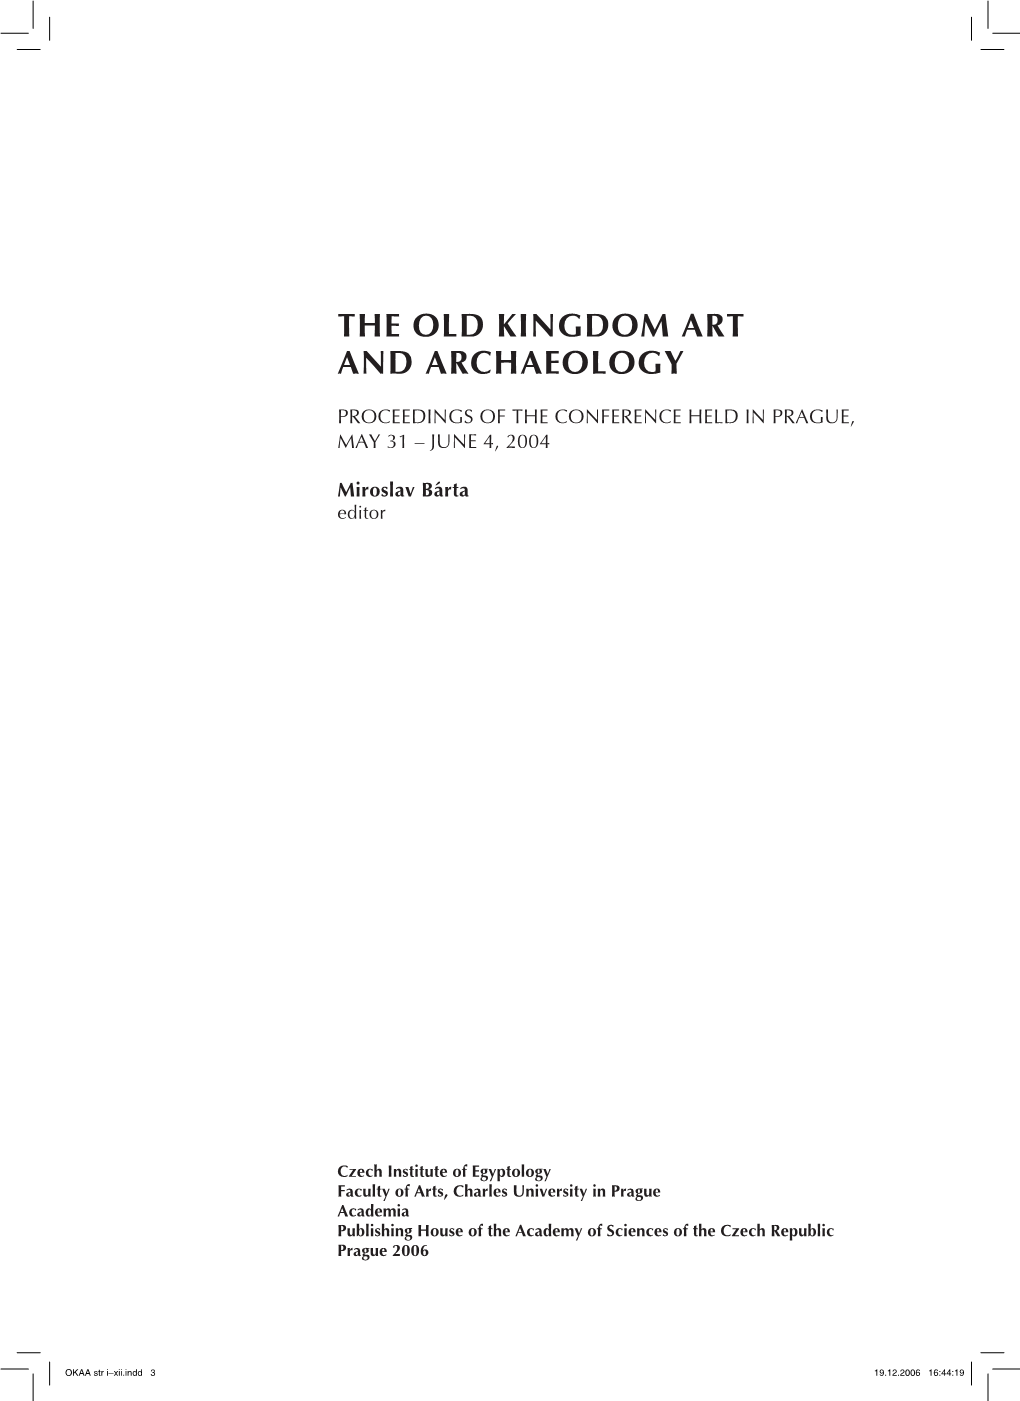 Little Women: Gender and Hierarchic Proportion in Old Kingdom Mastaba Chapels